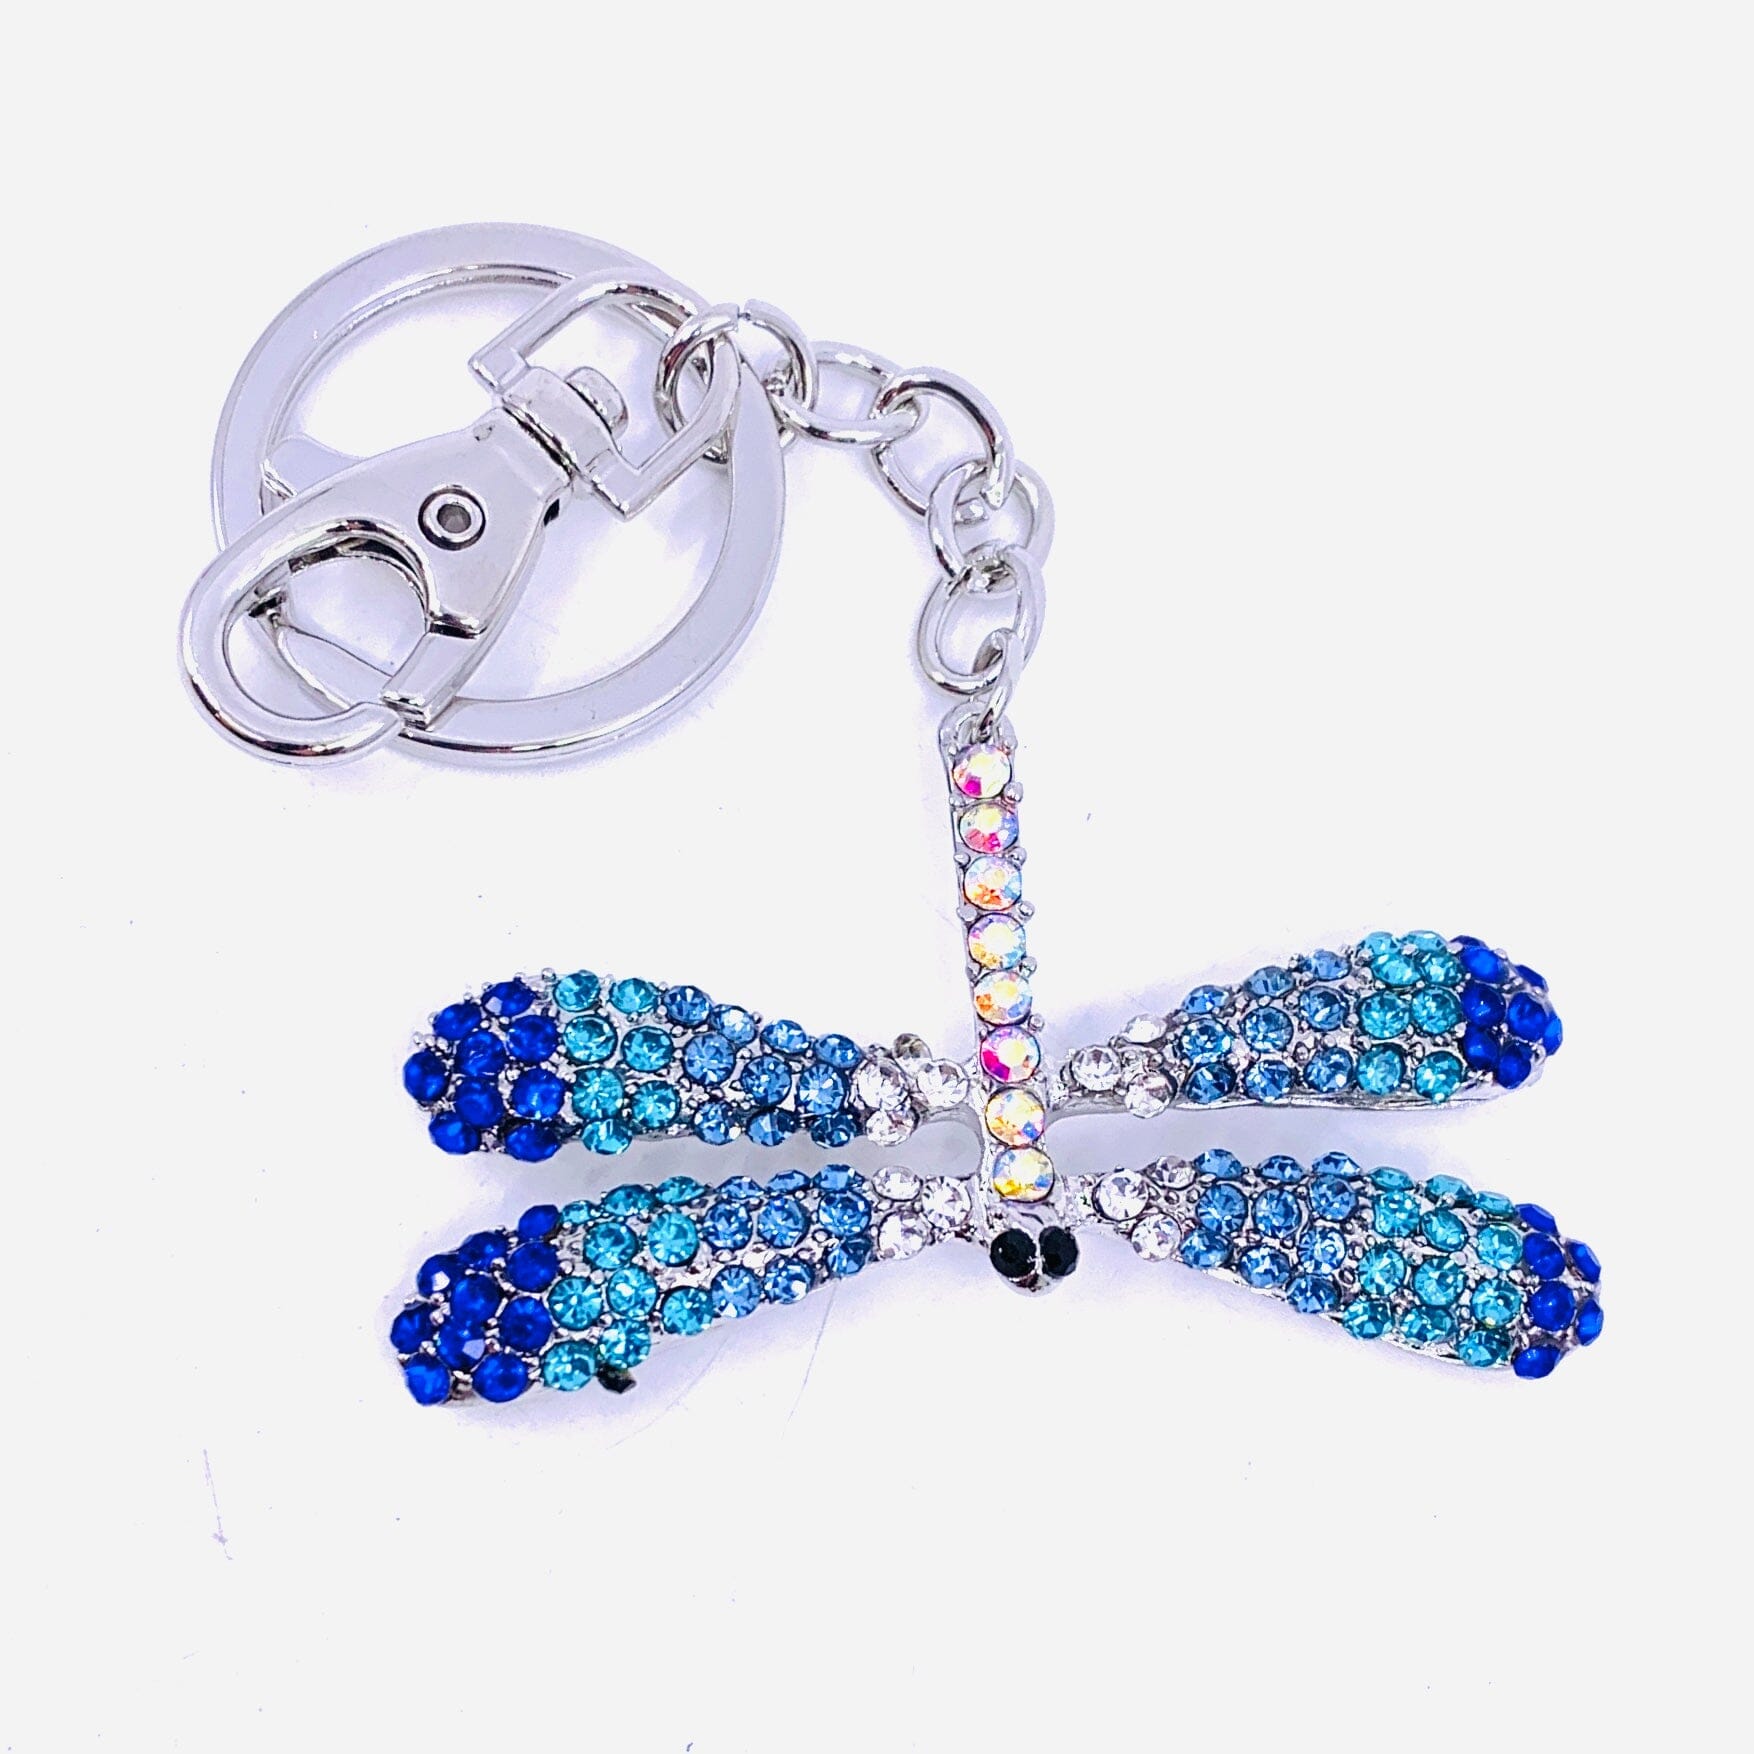 Bejeweled Key Chain 4, Dragonfly Accessory Kubla Craft 